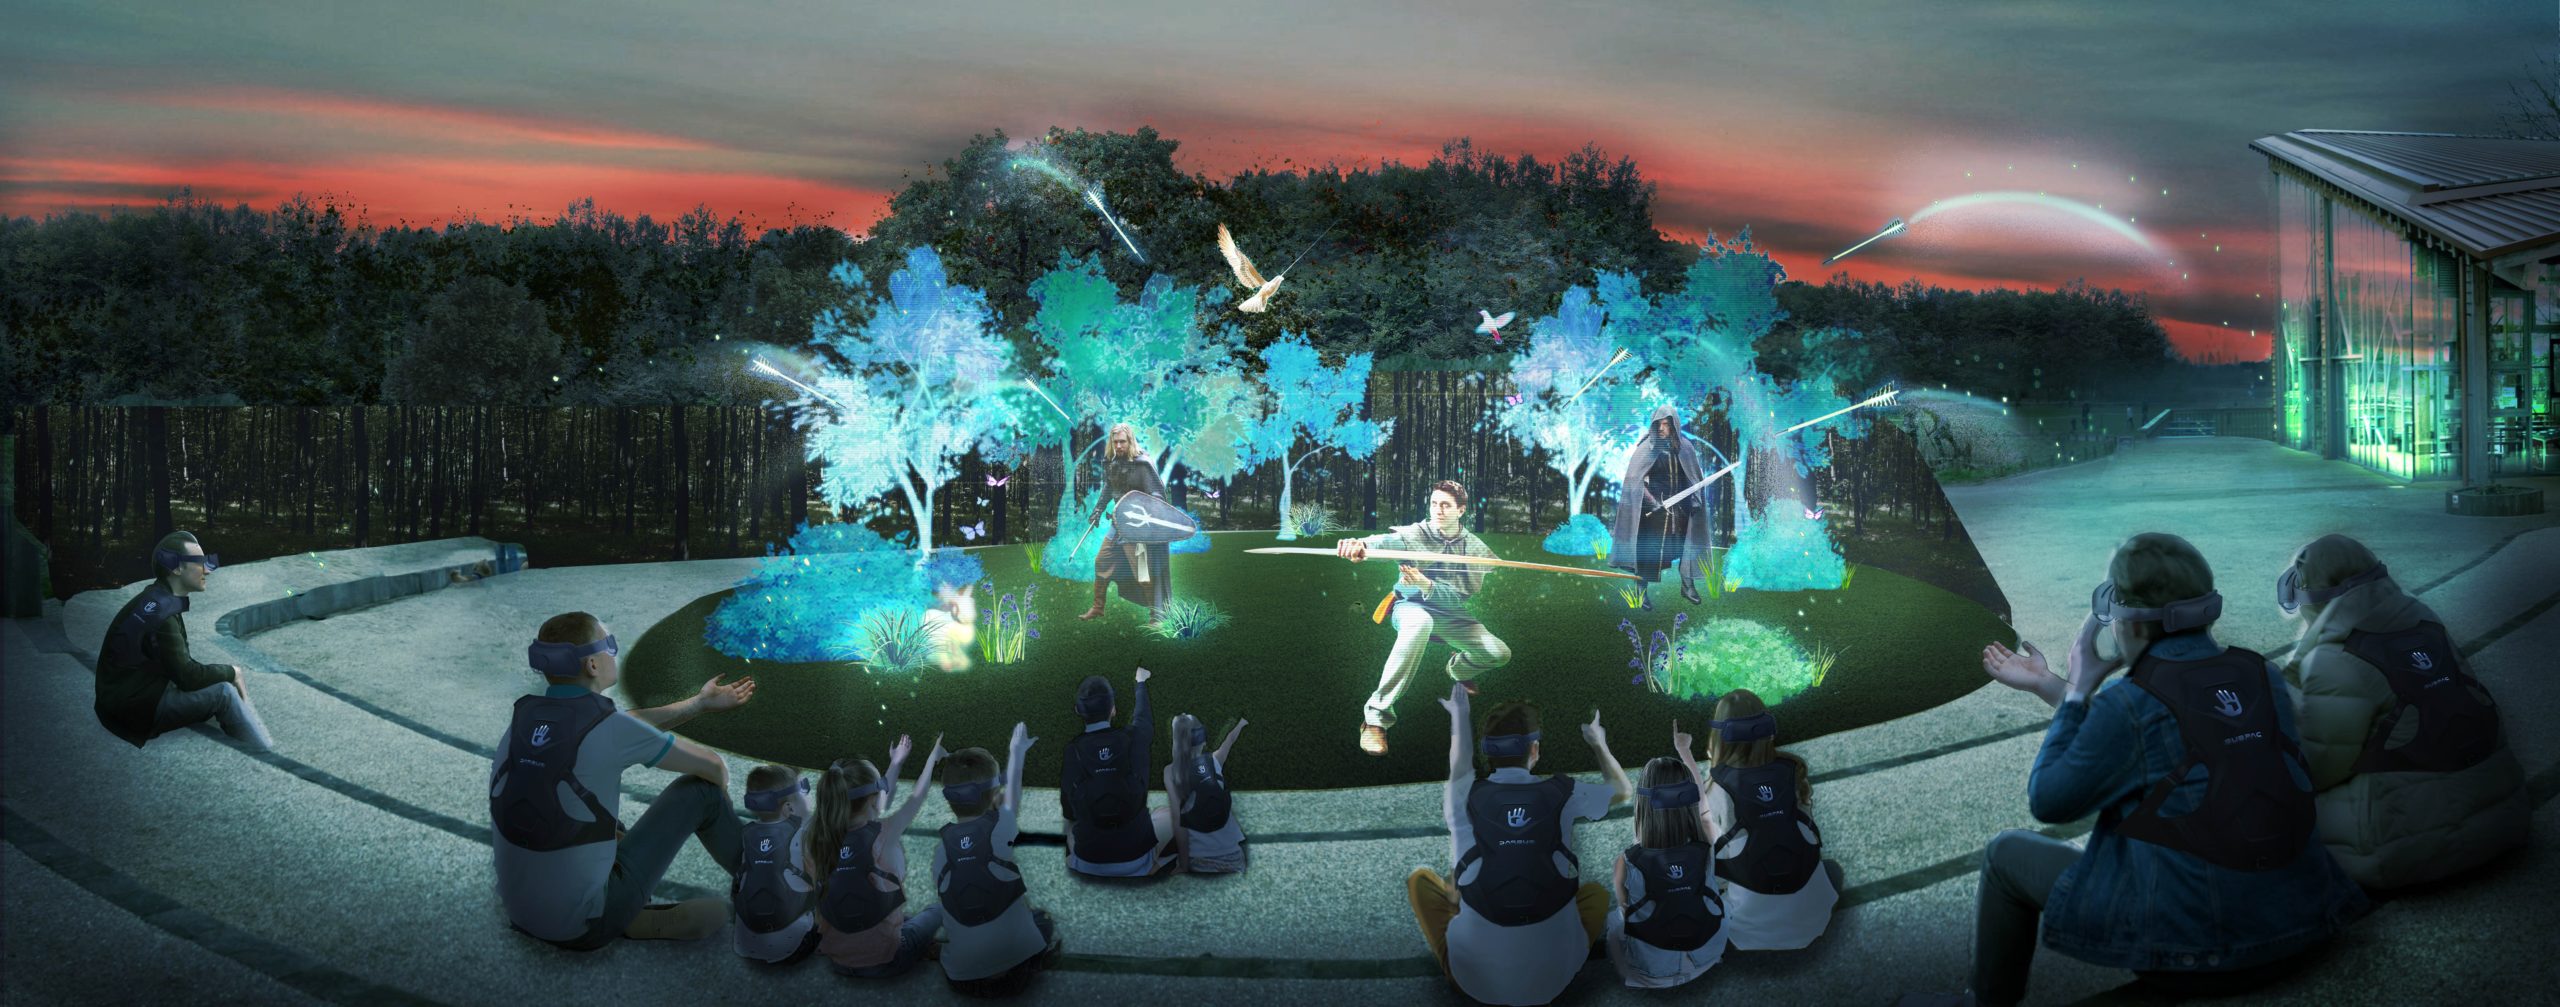 People sat enjoying an augmented reality experience in Sherwood Forest